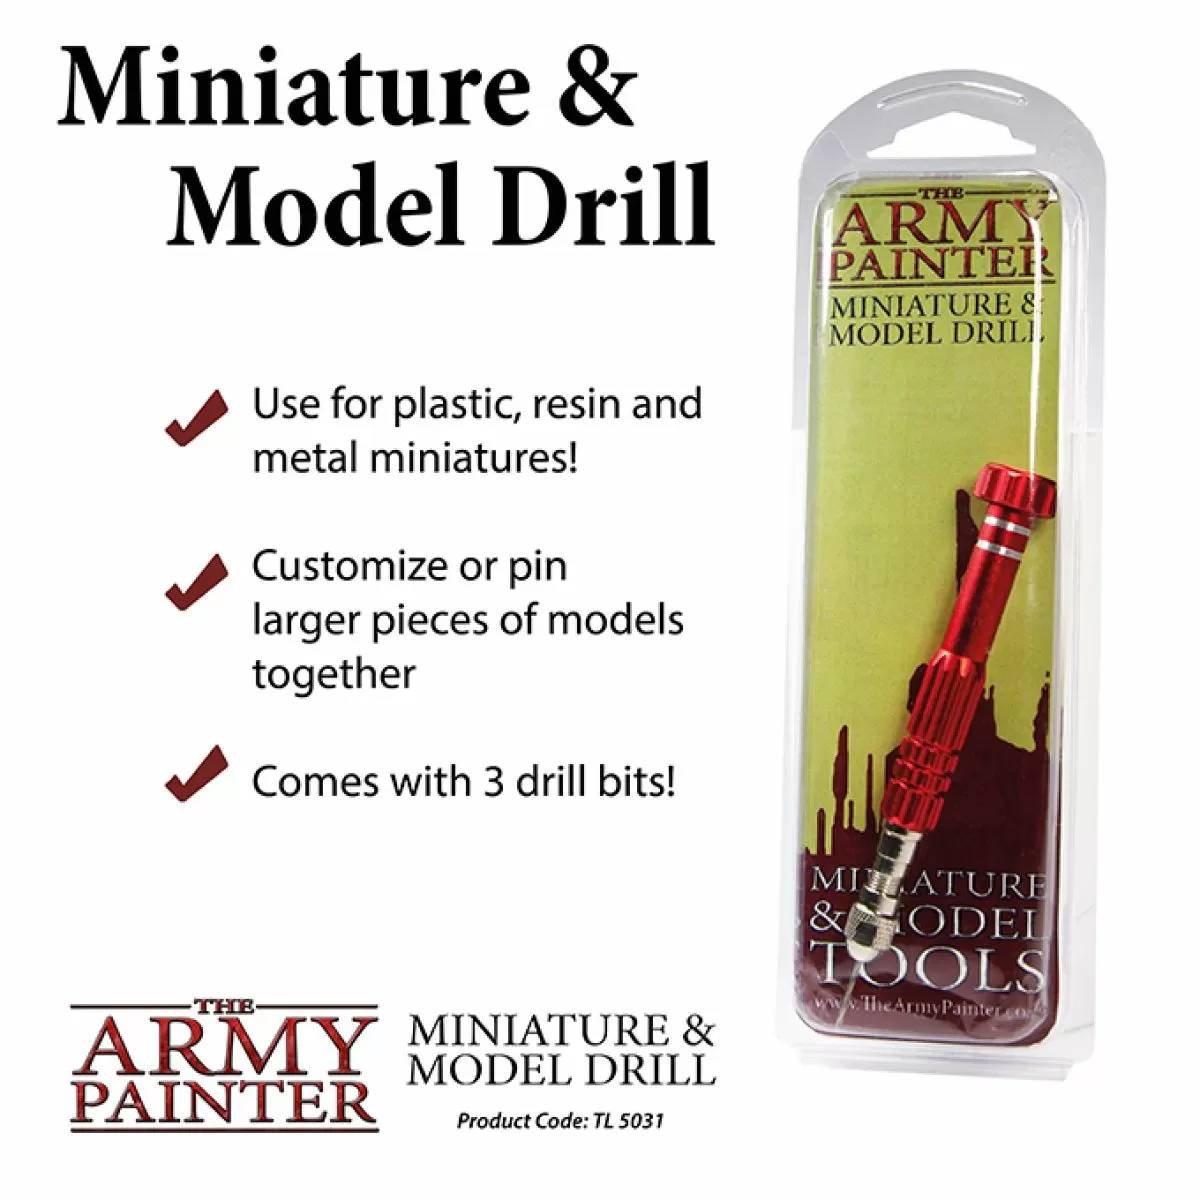 Army Painter - Miniature Model Drill